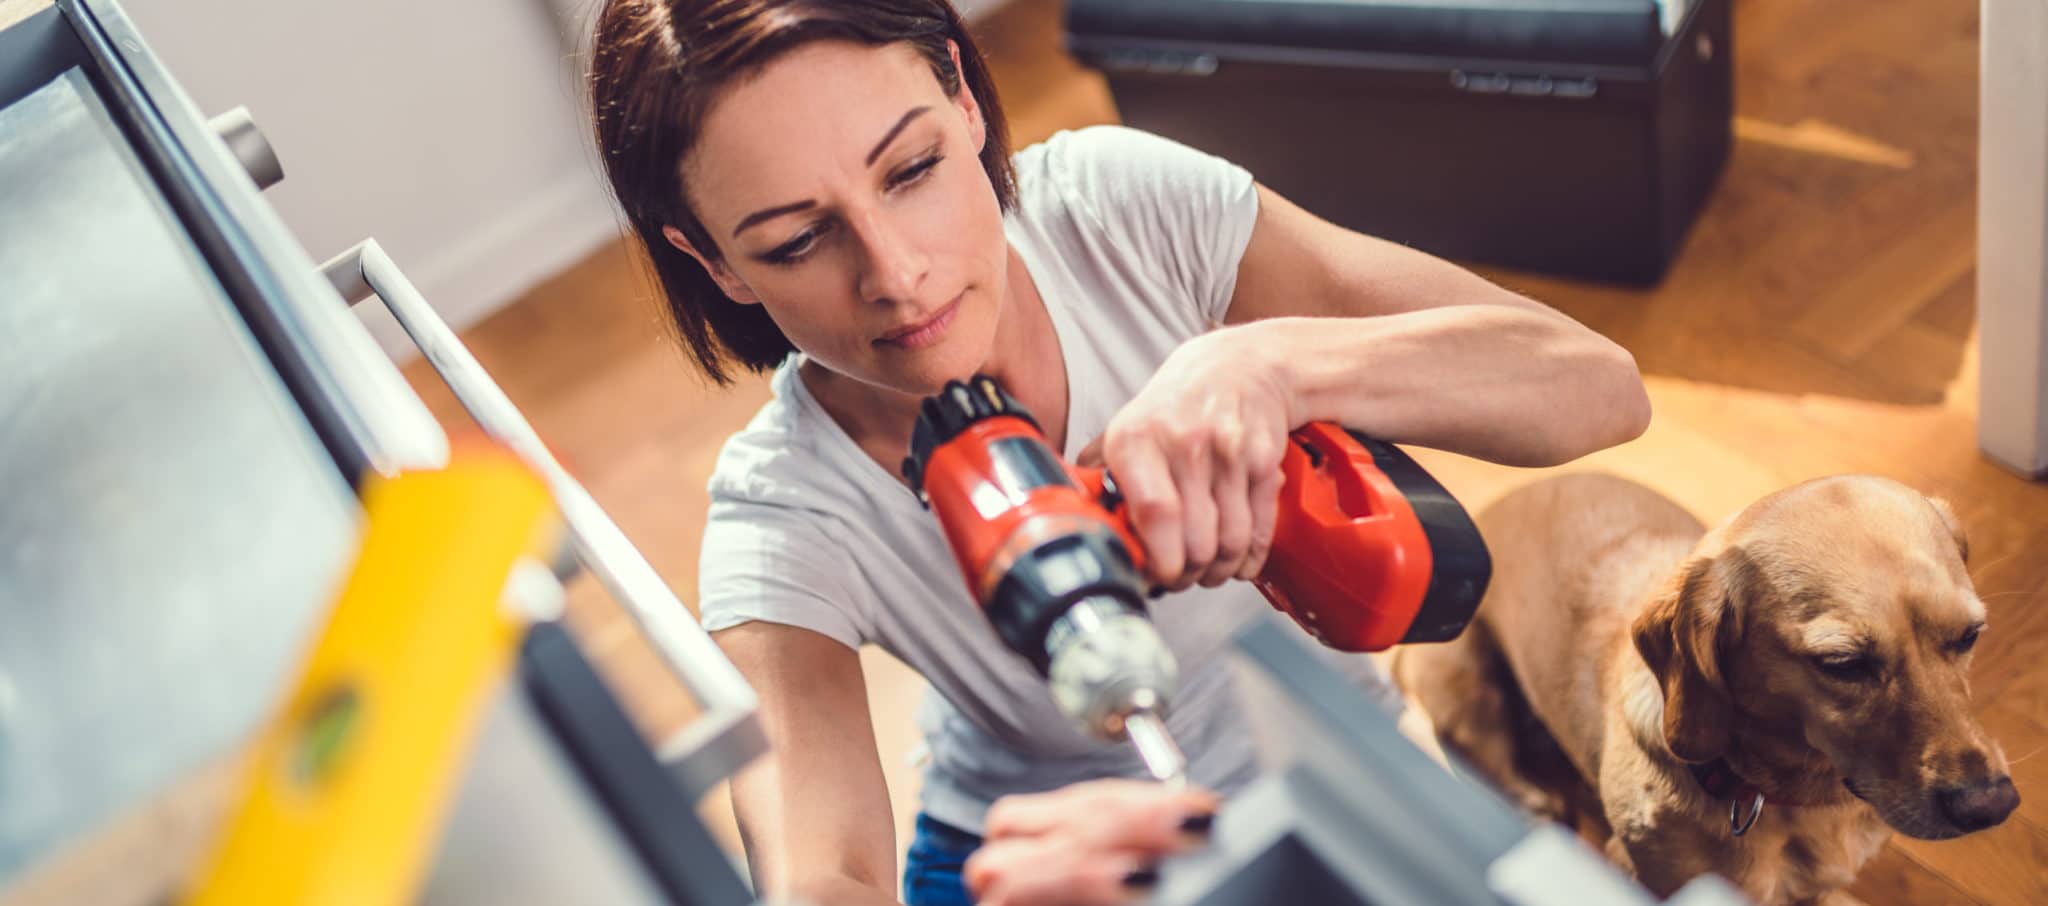 4 Essential Power Tools to Make Home Improvements Much Easier